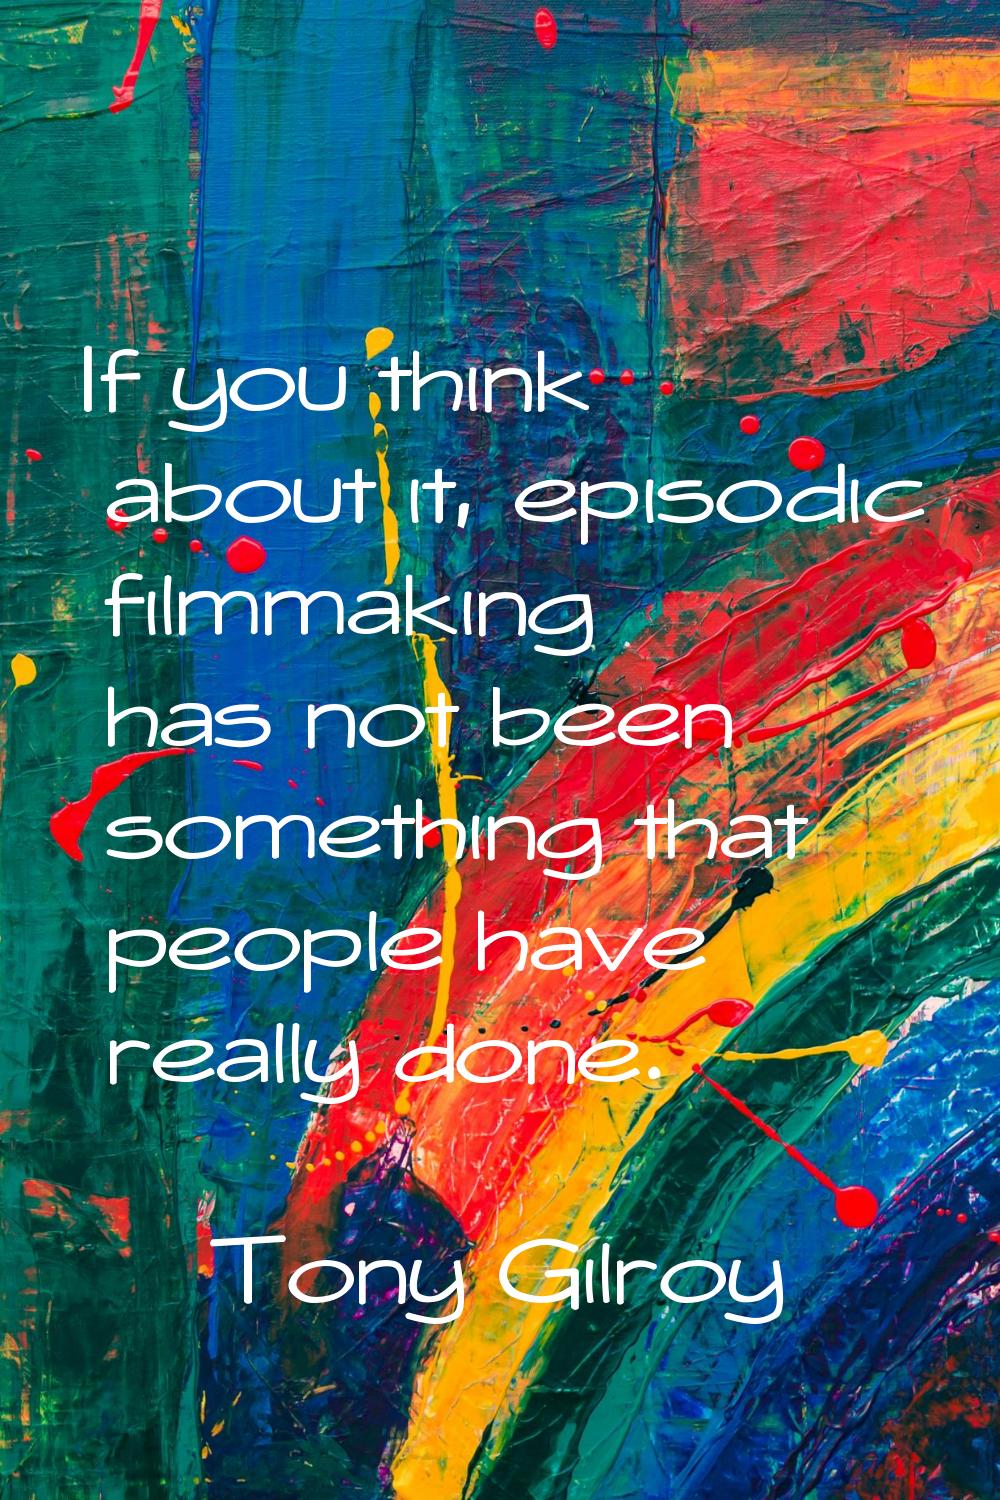 If you think about it, episodic filmmaking has not been something that people have really done.